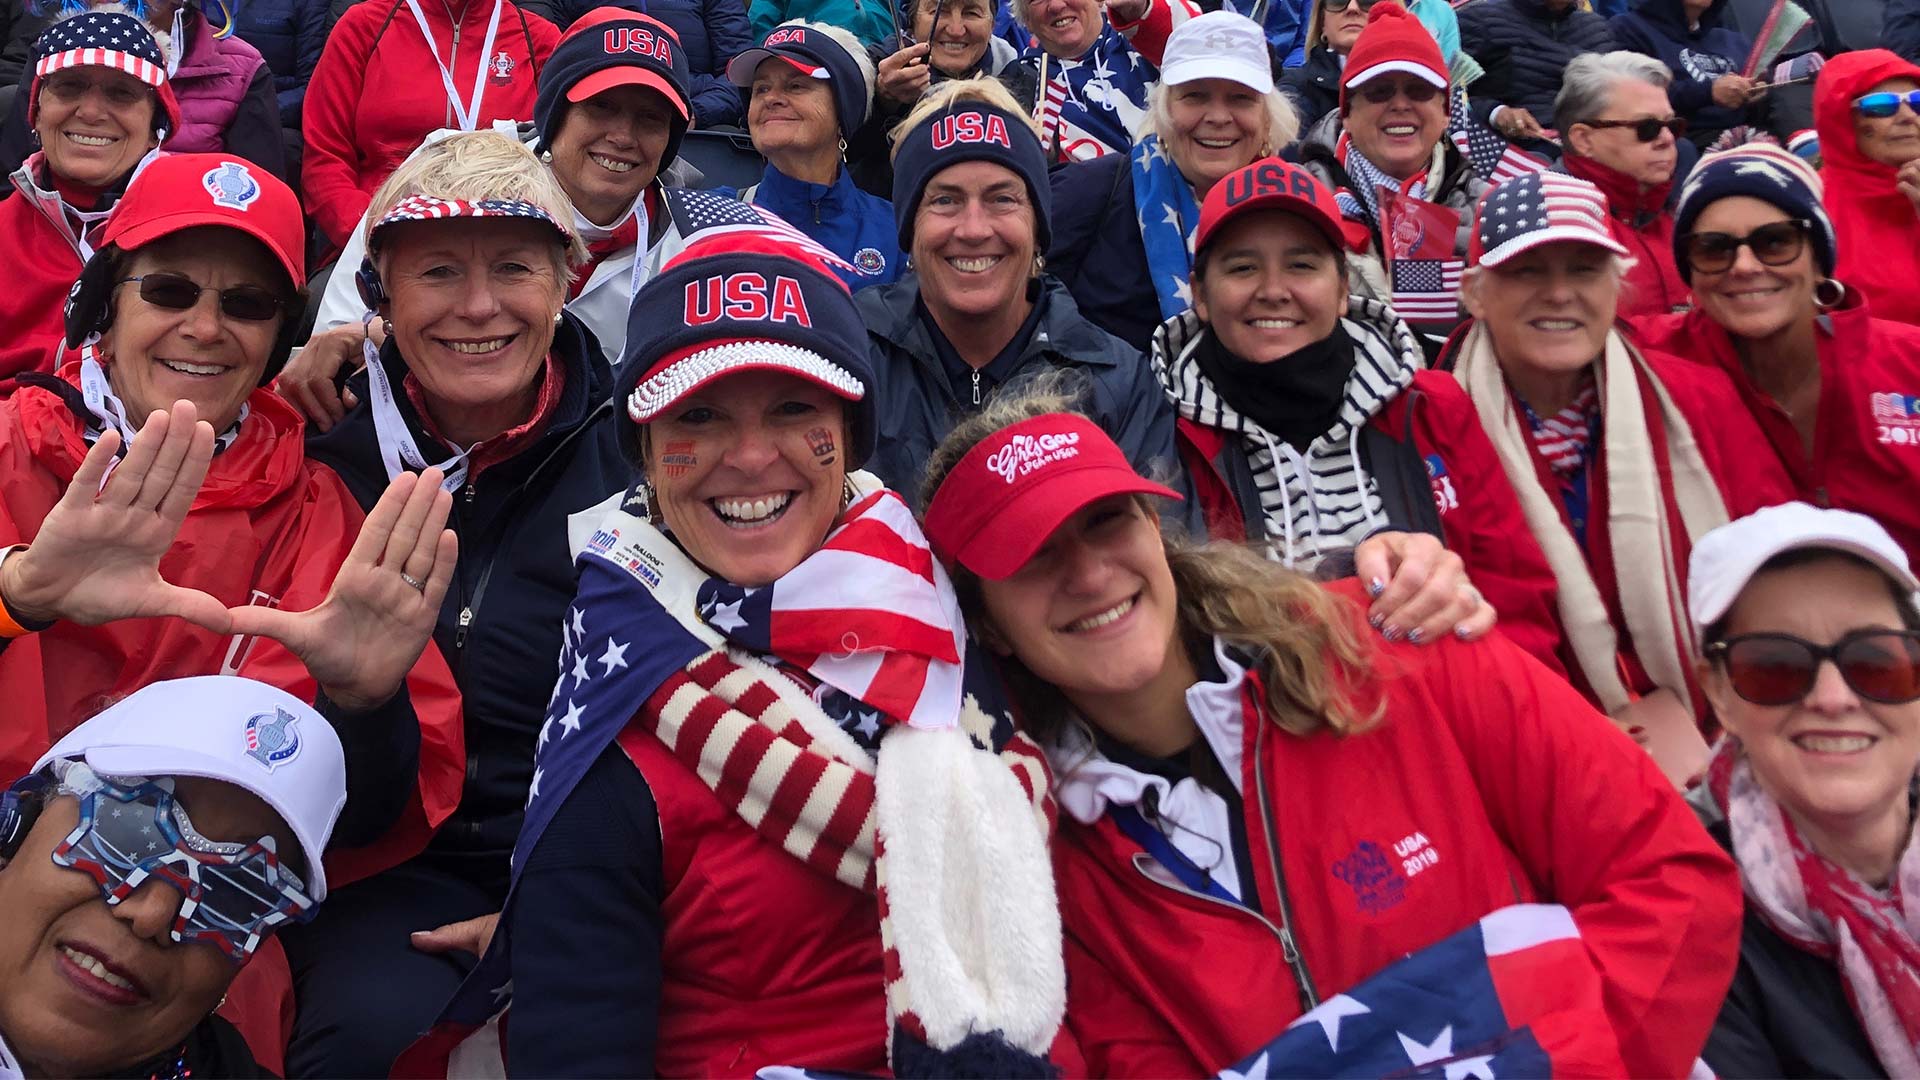 USA-clad golf fans cheer on the USA Team at the Solheim Cup